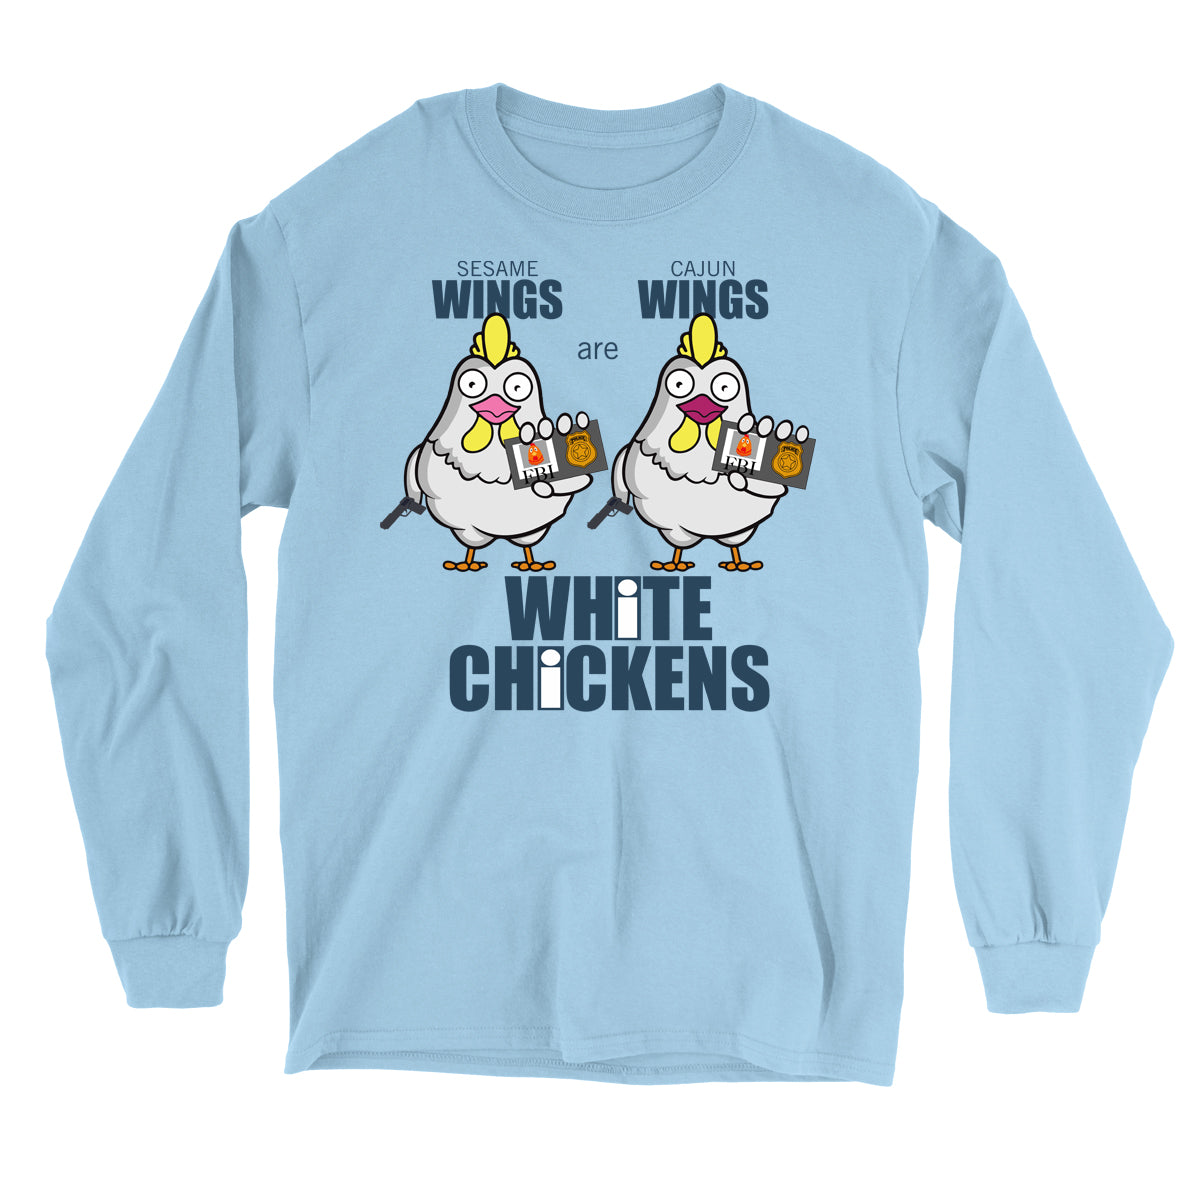 Movie The Food - White Chickens Longsleeve T-Shirt - Light Blue